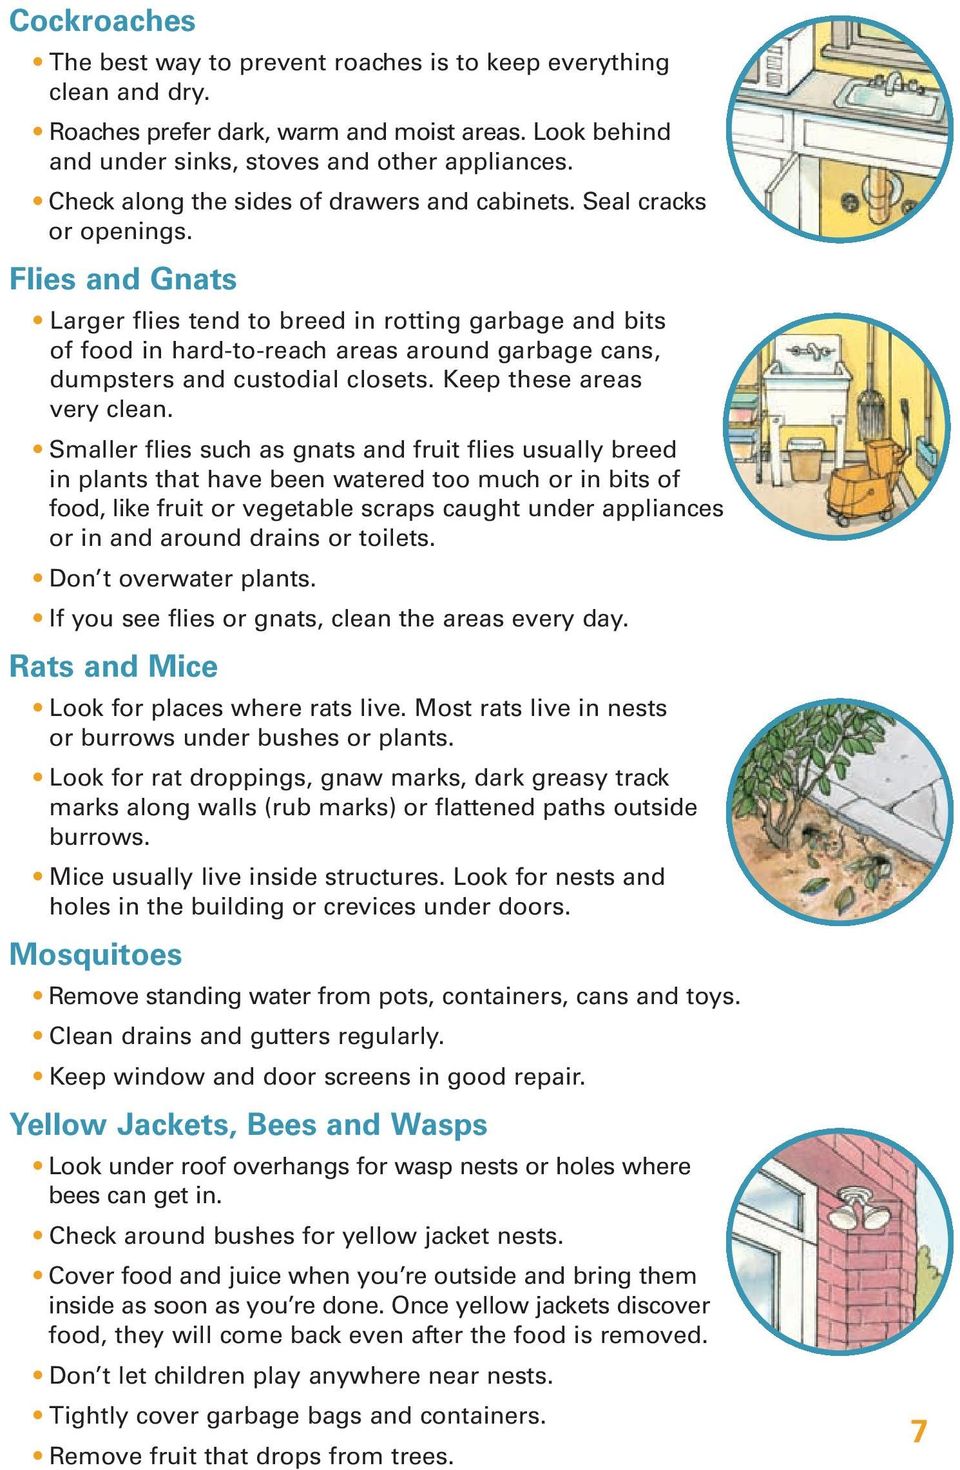 Flies and Gnats Larger flies tend to breed in rotting garbage and bits of food in hard-to-reach areas around garbage cans, dumpsters and custodial closets. Keep these areas very clean.